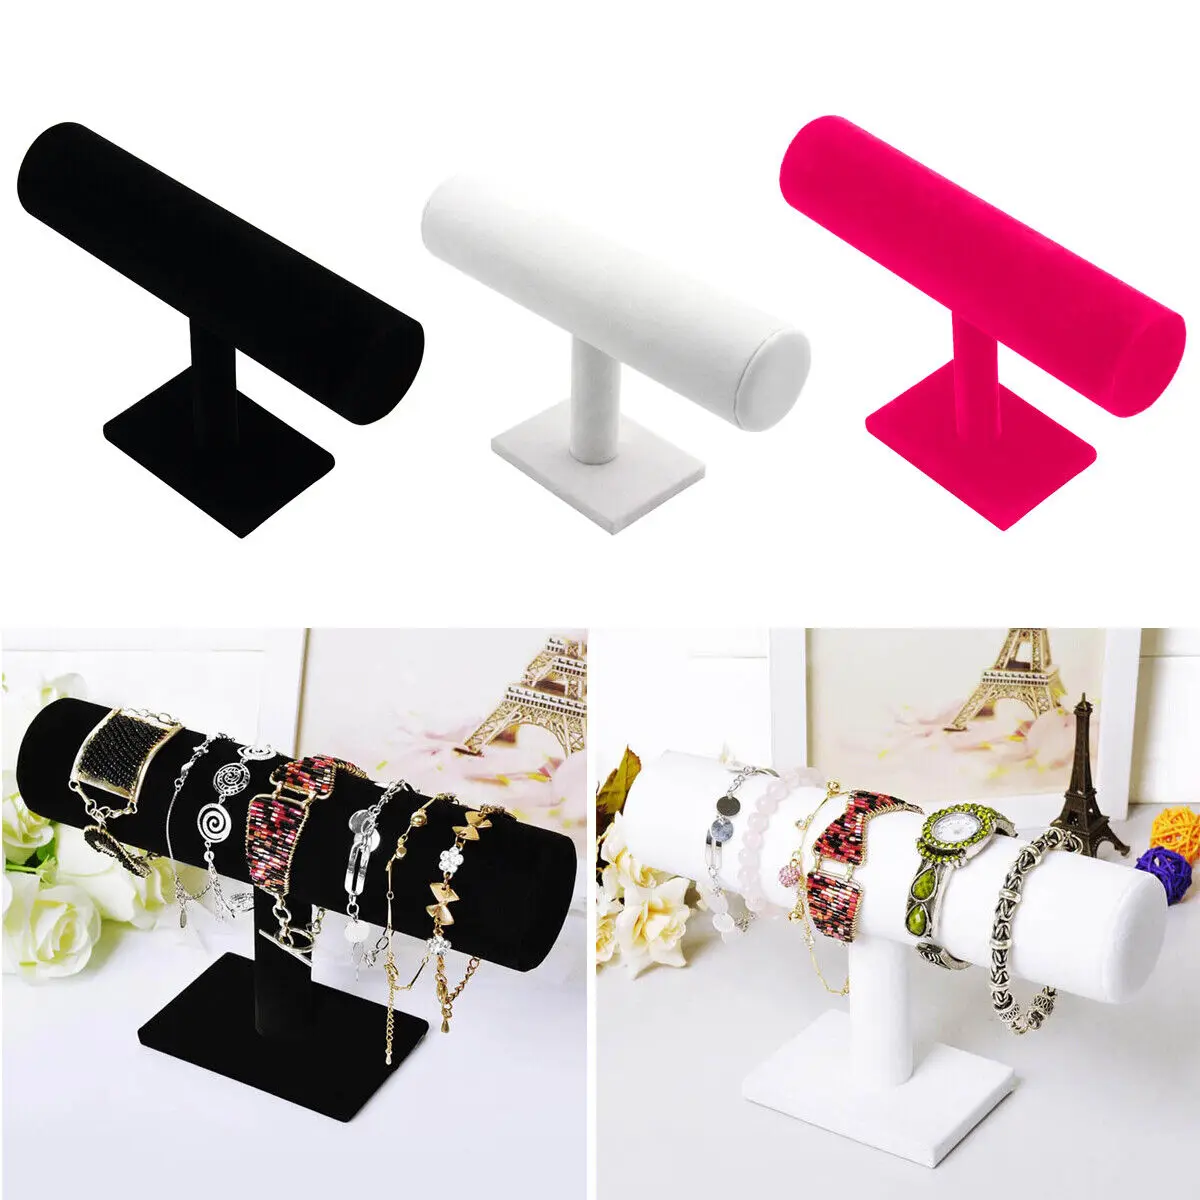 Single Tier Velvet Bracelet Chain Watch T-Bar Rack Jewelry Hard Display Stand Holder Jewelry Organizer High Qualitydisplay Stand factory price luxury bracelet holder jewelry organizer storage ornament rack showcase watch display stand jewelry display boxes